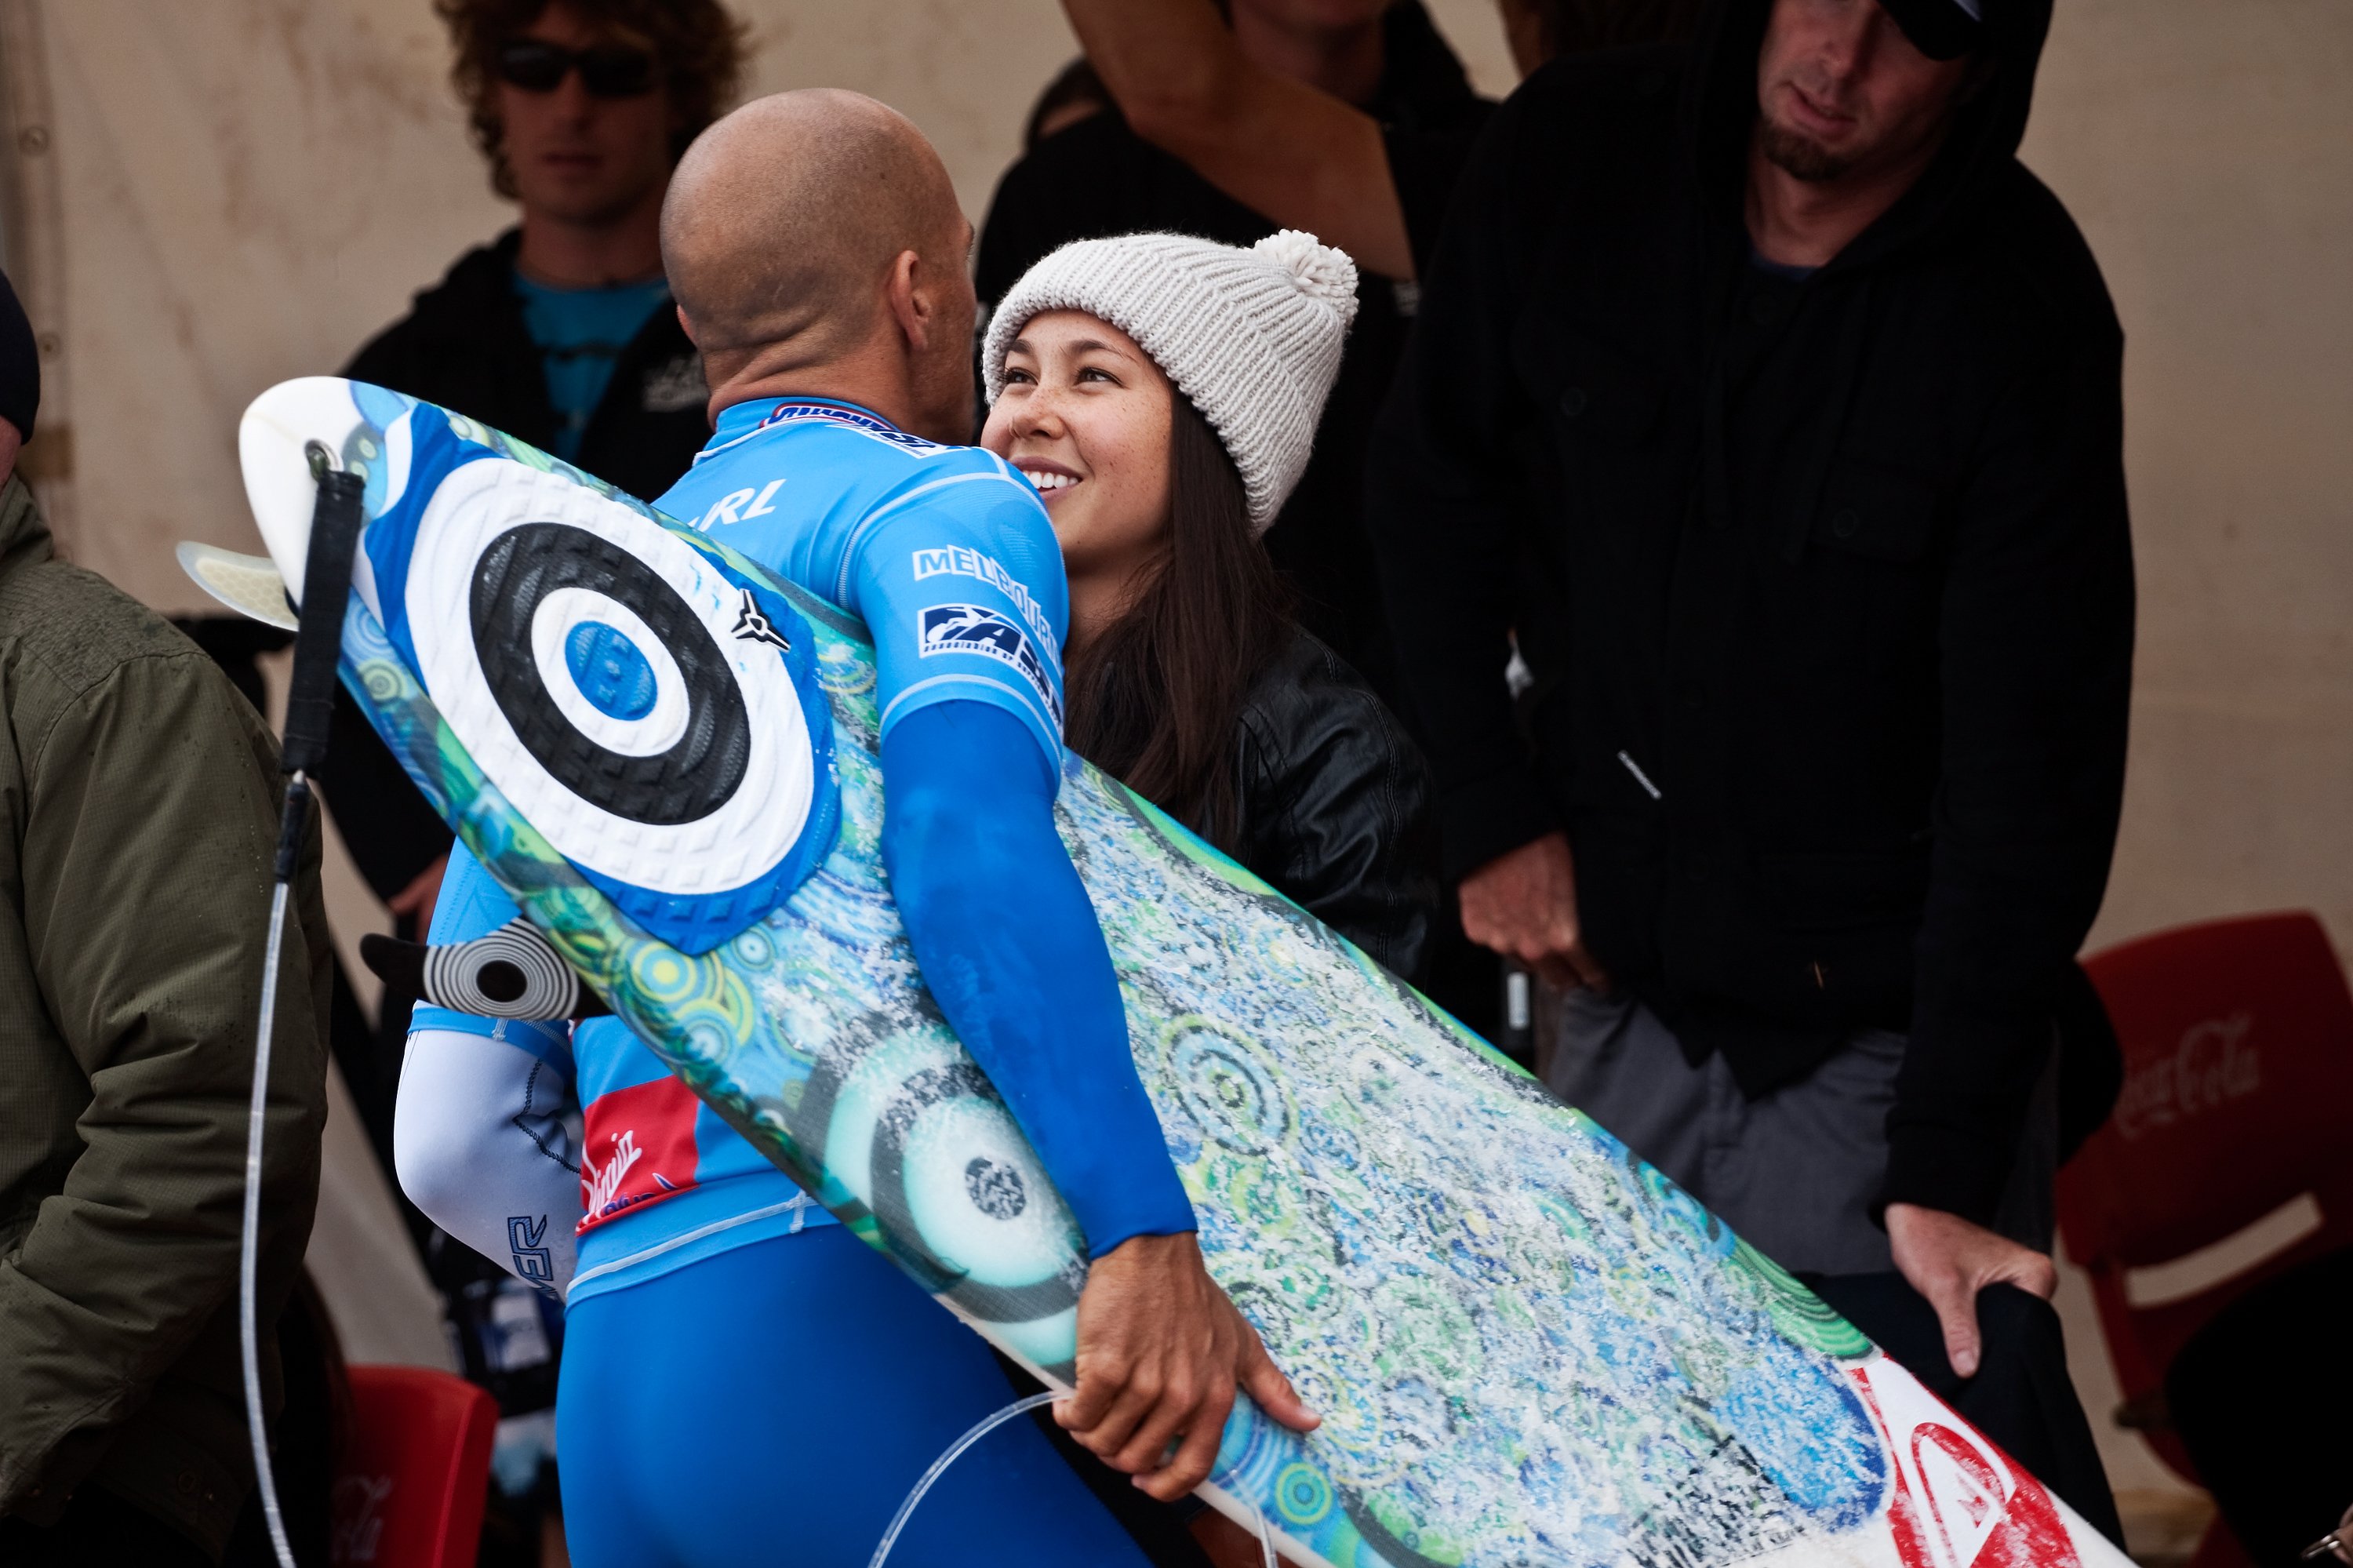 Kalani Miller smiles to Kelly Slater on April 9, 2010, in Johanna, Australia. | Source: Getty Images